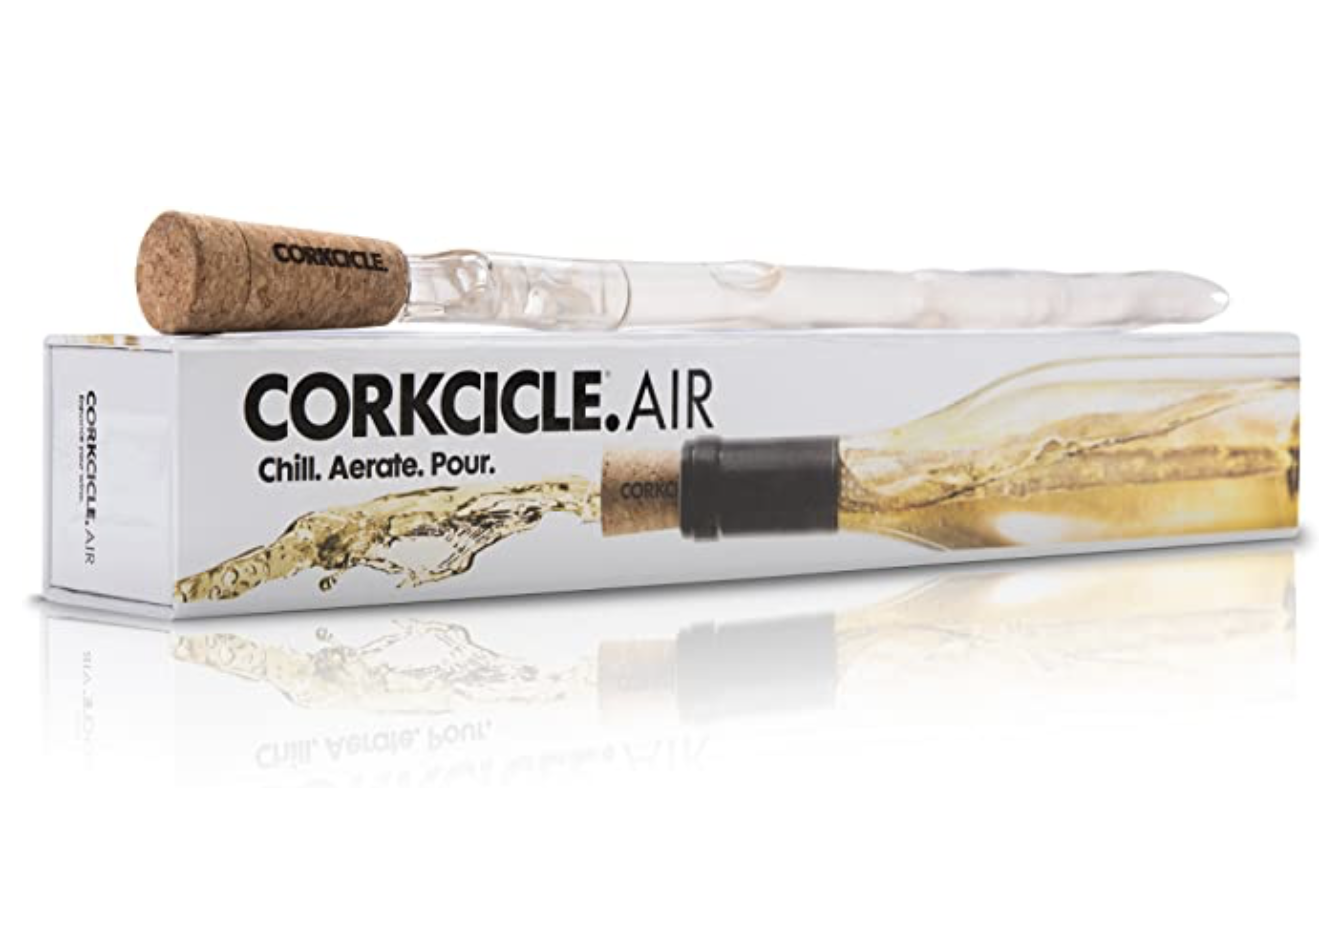 Corkcicle